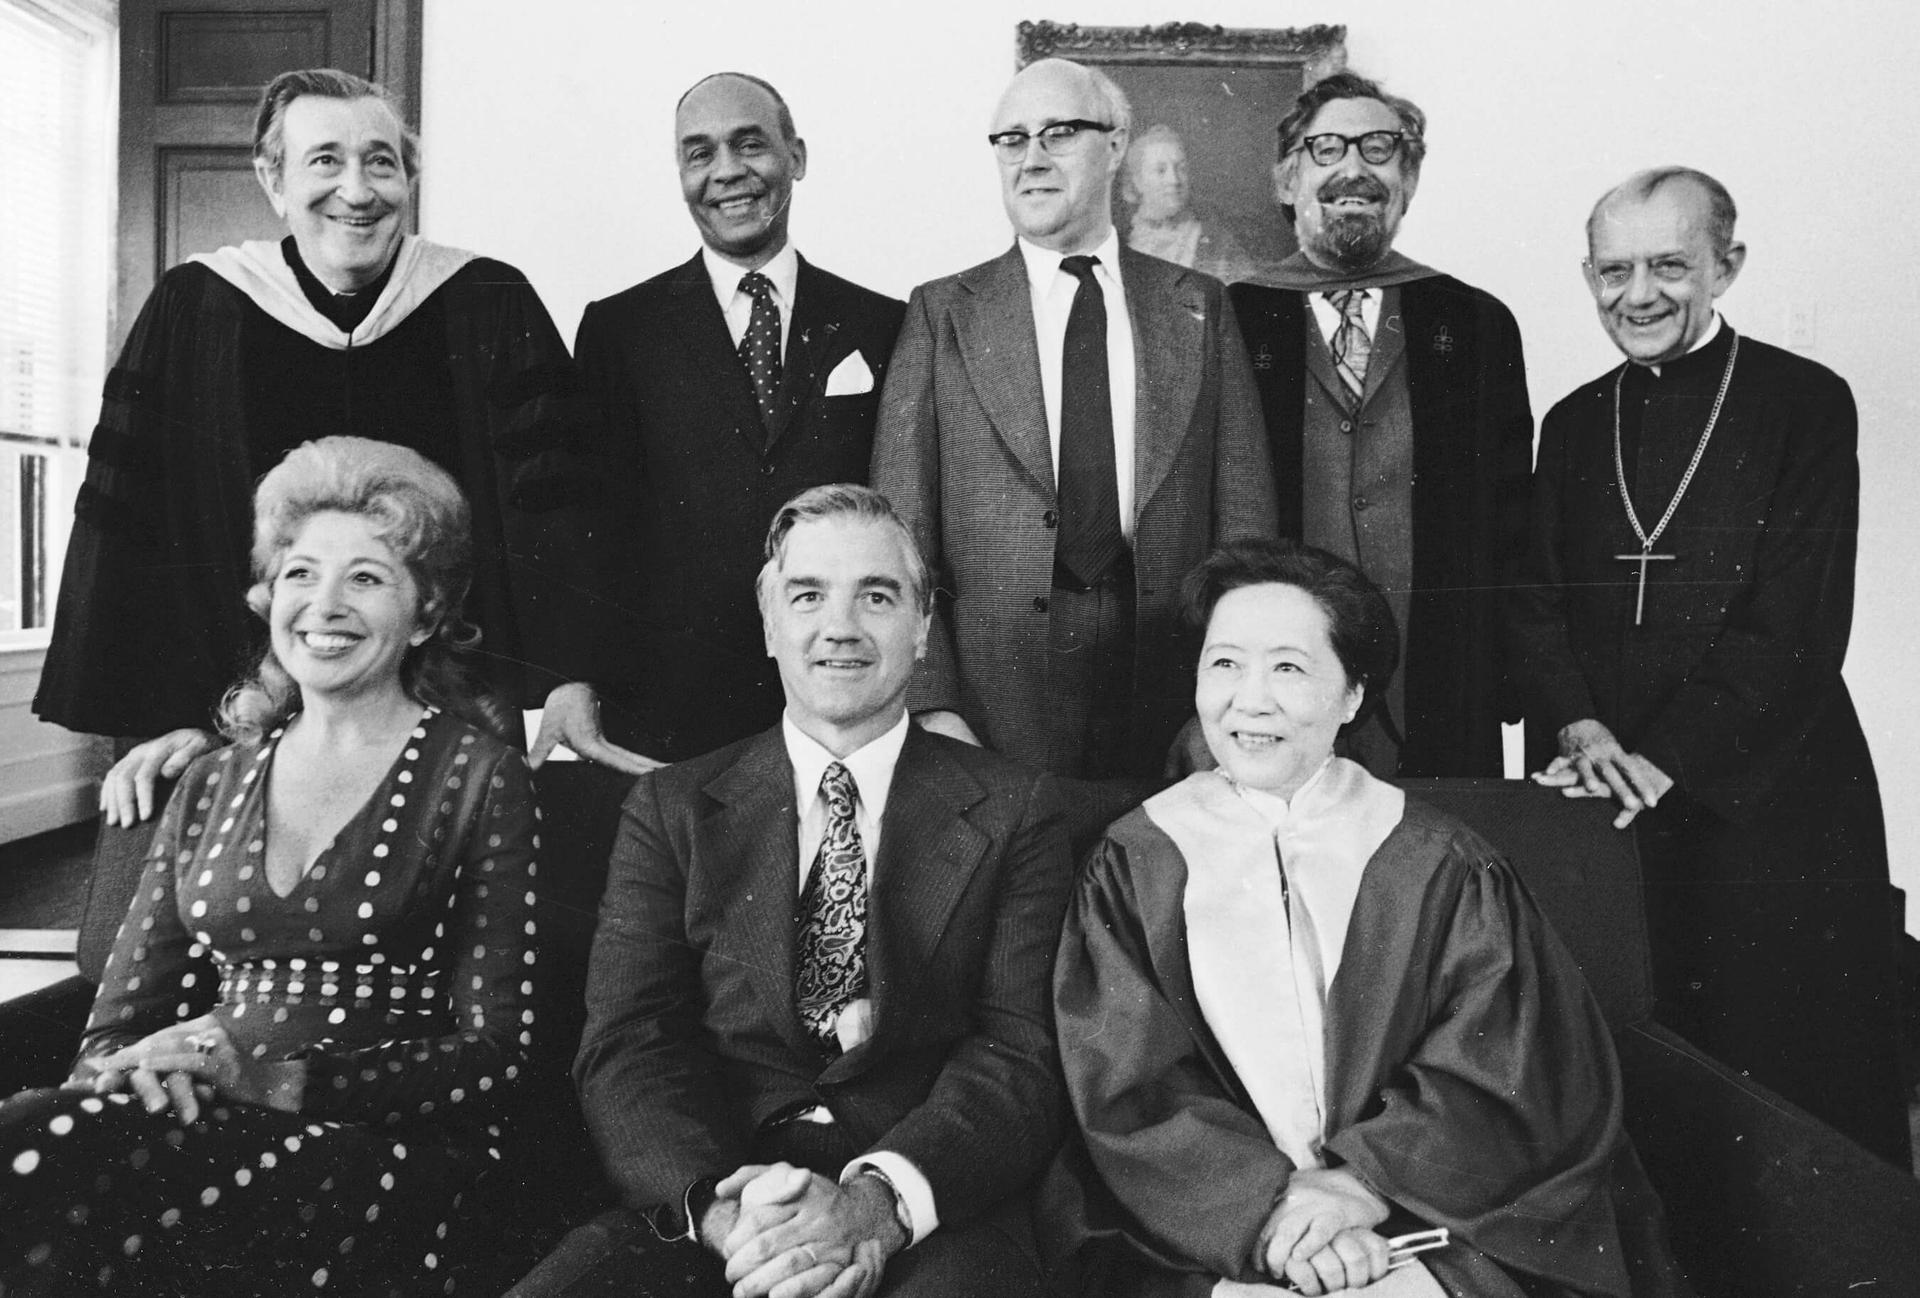 Chien Shiung Wu (bottom, right), then-professor of Columbia University New York, receives an honorary degree along with other recipients at Harvard University on June 14, 1974, in Cambridge, Massachusetts.